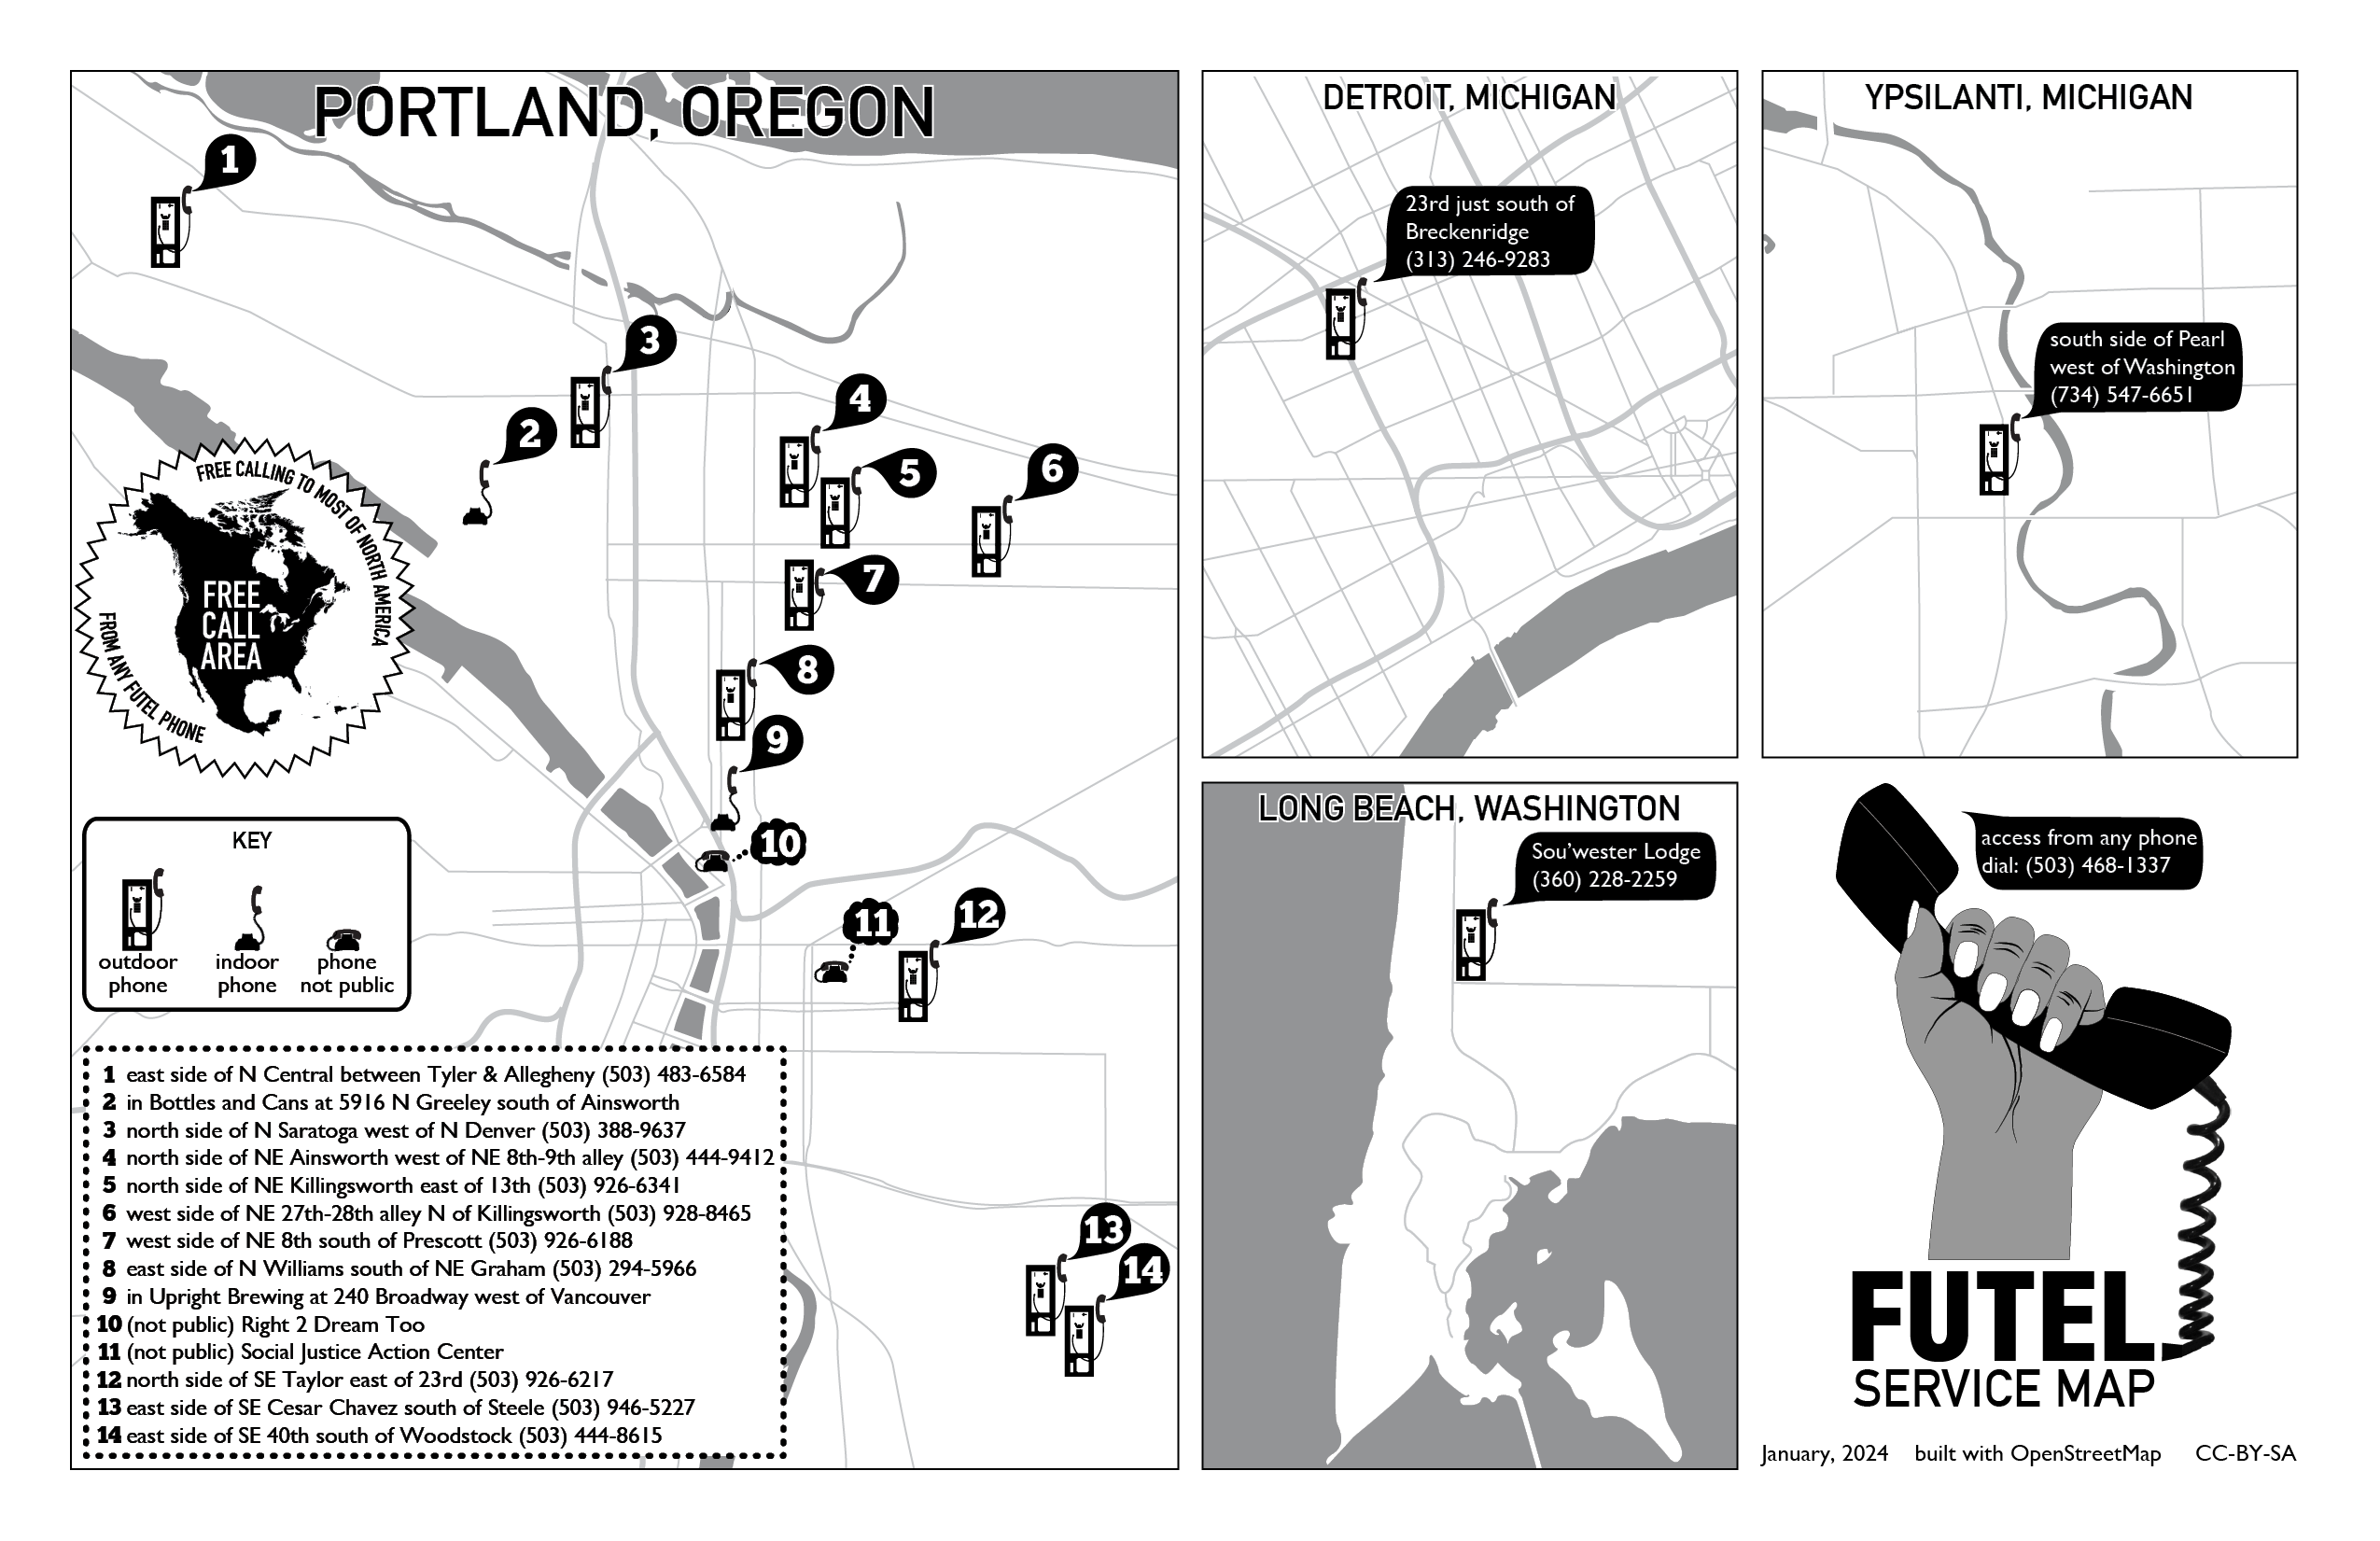 Several maps show the geographic location of Futel phone installations.